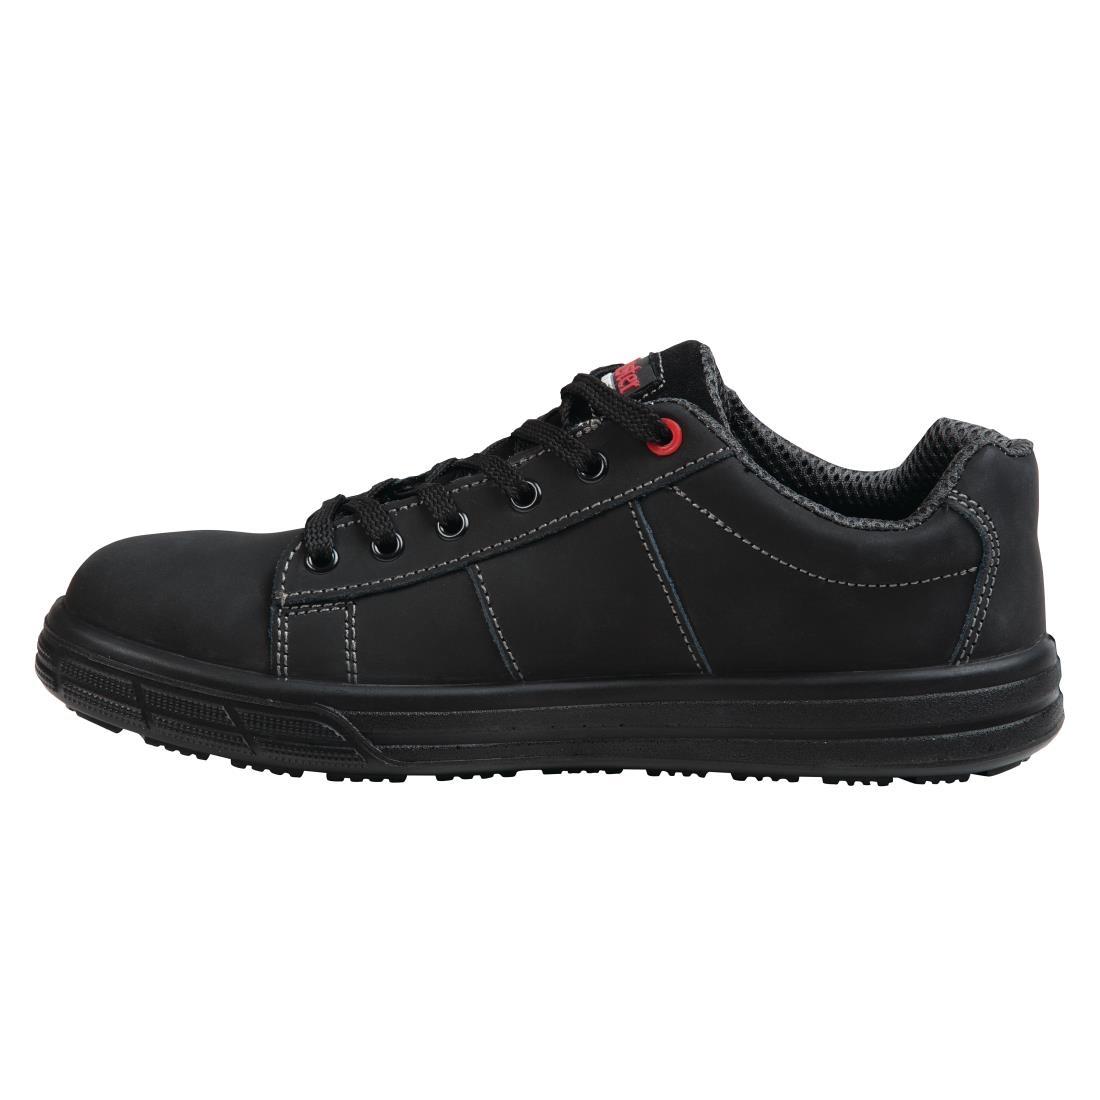 Slipbuster Safety Trainers Black 37 - BB420-37  - 6